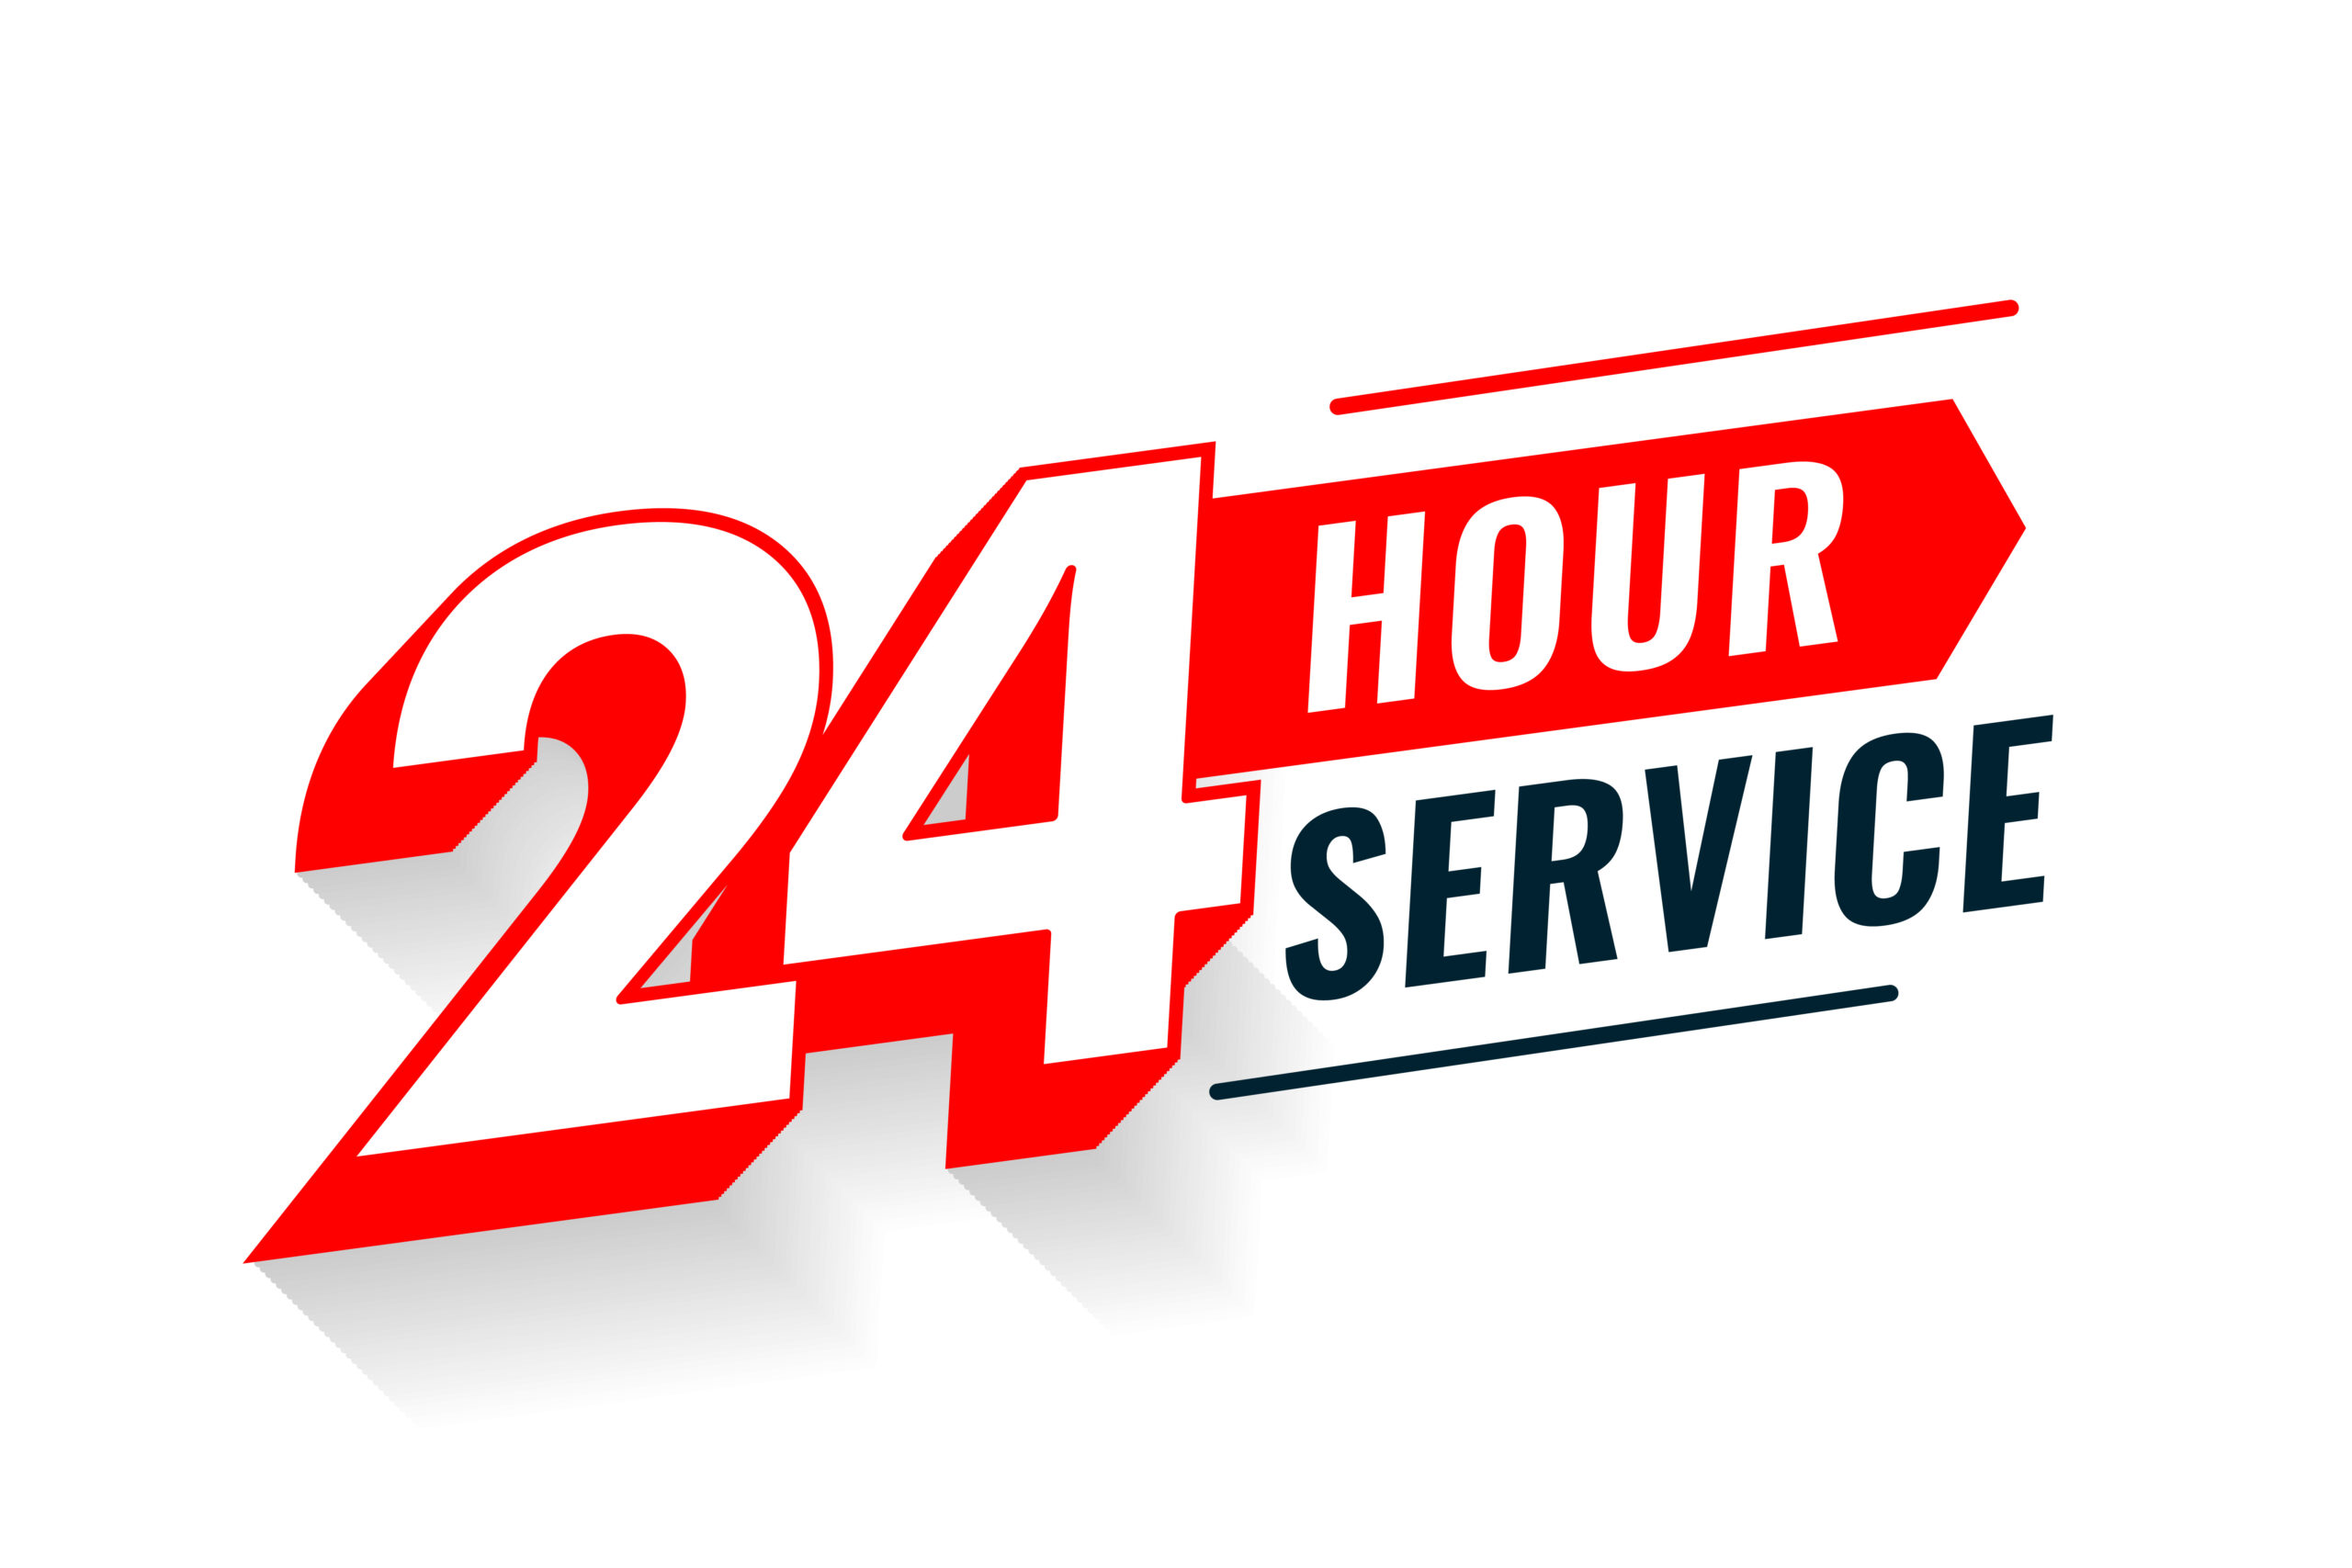 Update more than 122 24 7 service logo latest